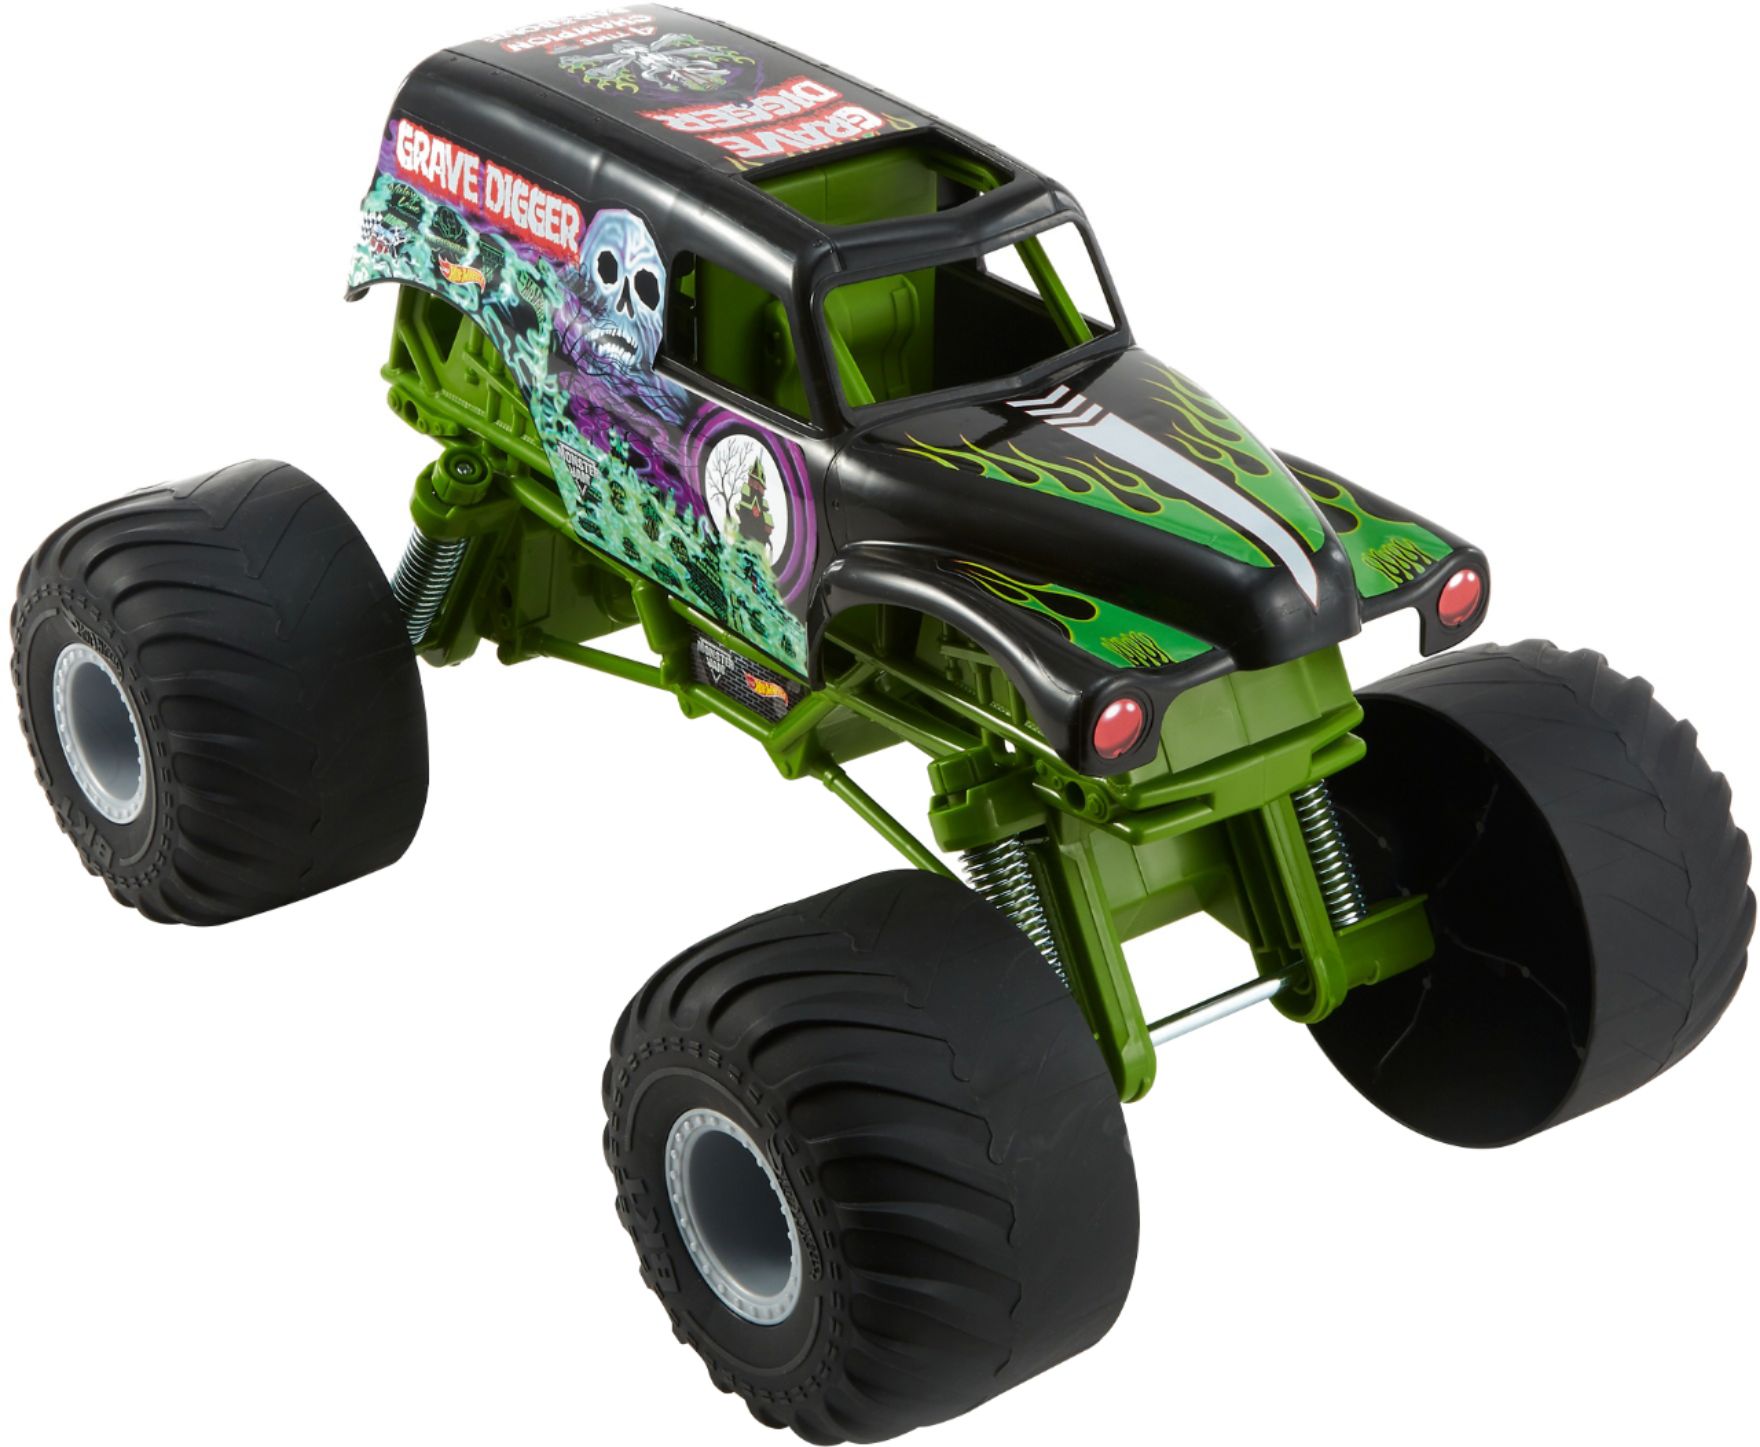 hot wheels giant grave digger